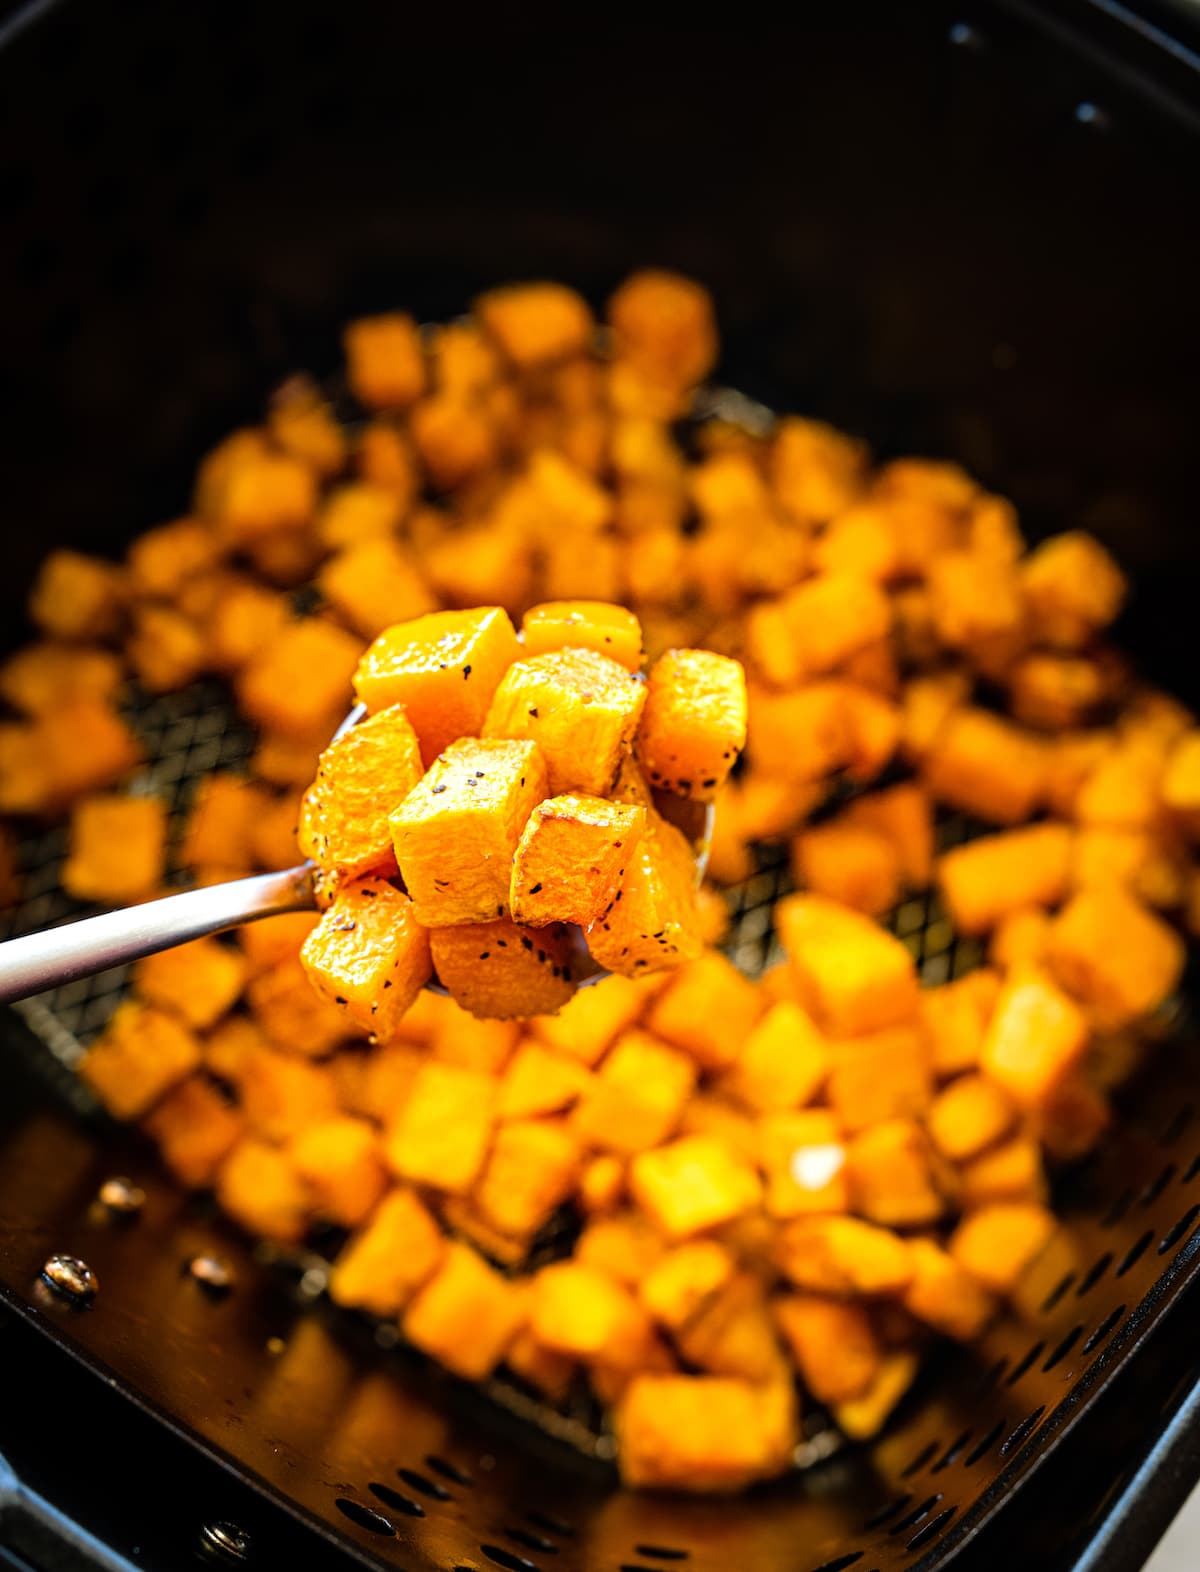 A metal spoon with a spoonful of cubed butternut squash that has been air fried.